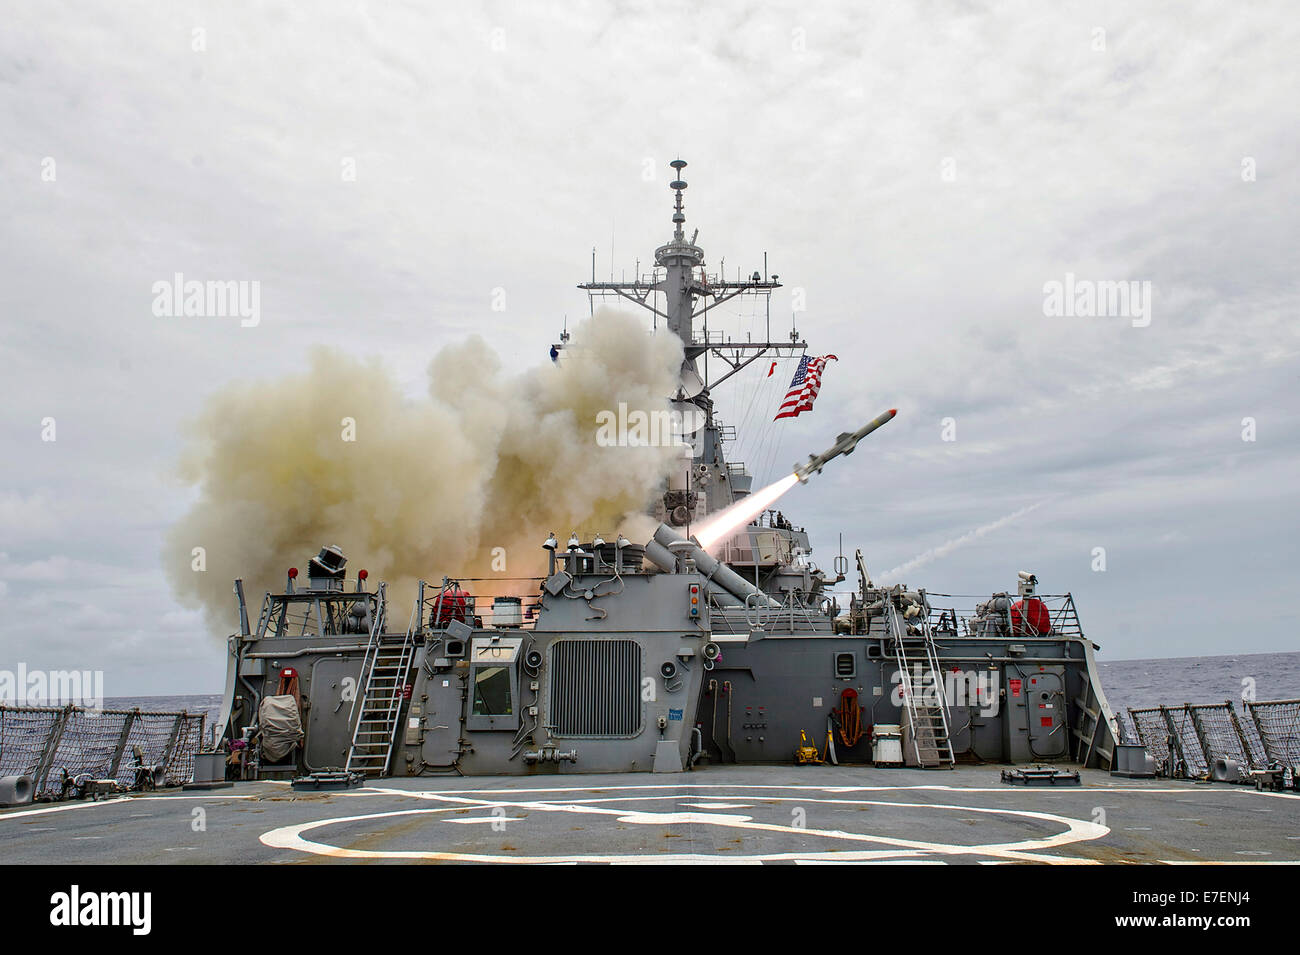 A Harpoon anti-ship missile is launched from the Arleigh-Burke guided-missile destroyer USS Stethem during exercise Valiant Shield 2014 September 15, 2014 off the coast of Guam. Stock Photo